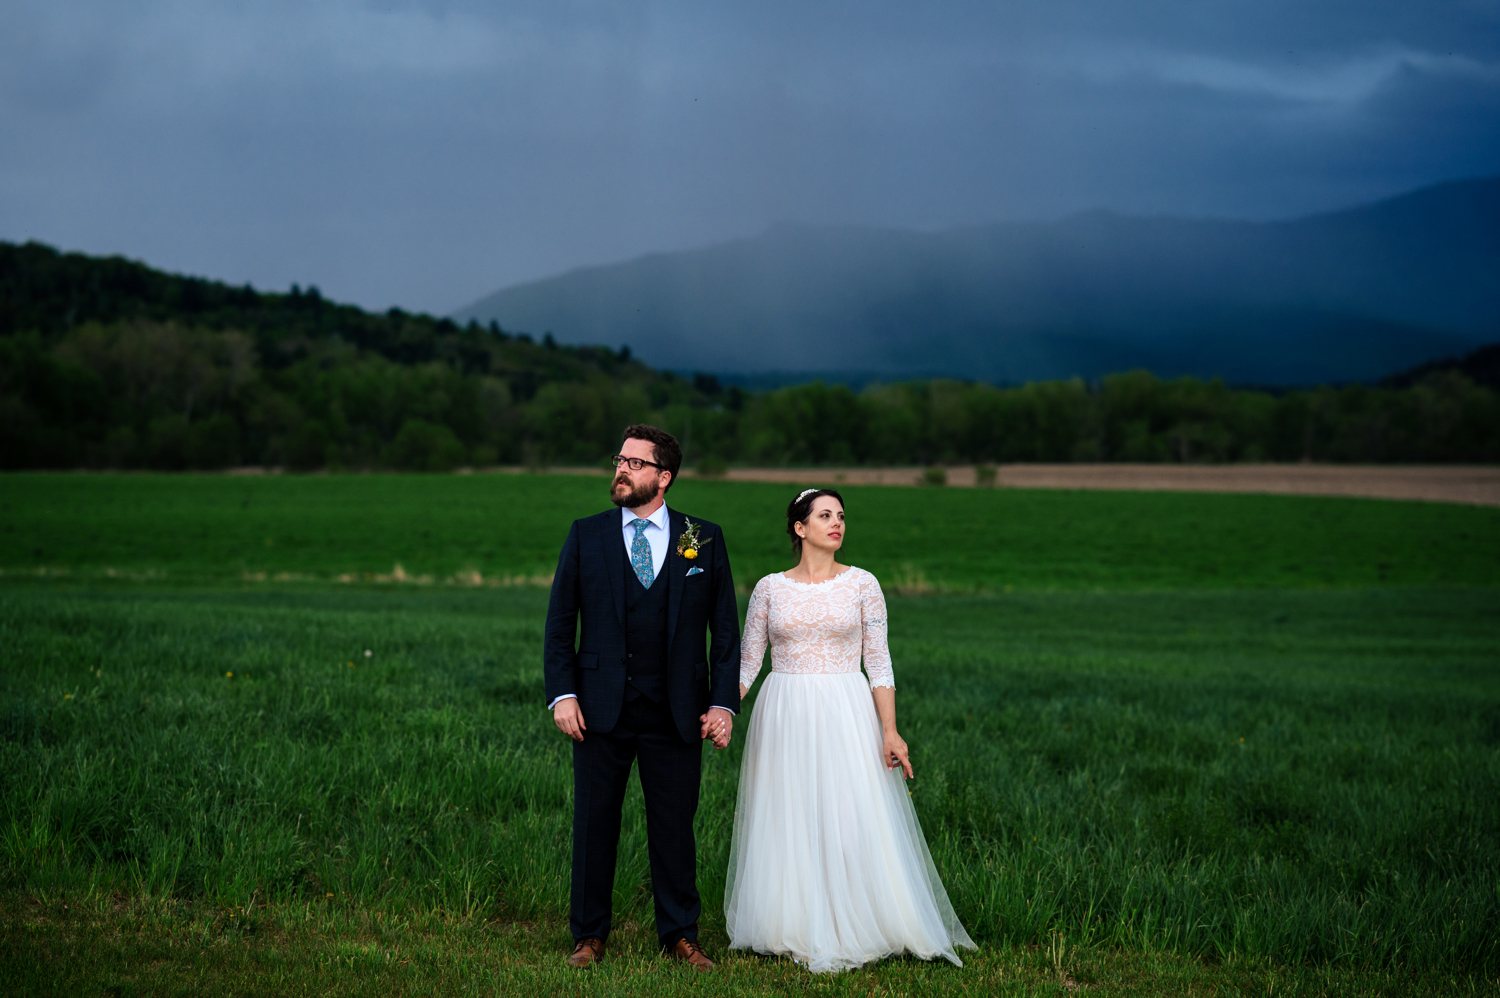 Anne and Jed standing together at their wedding venue with mountain views in Vermont while rain clouds gather behind them.